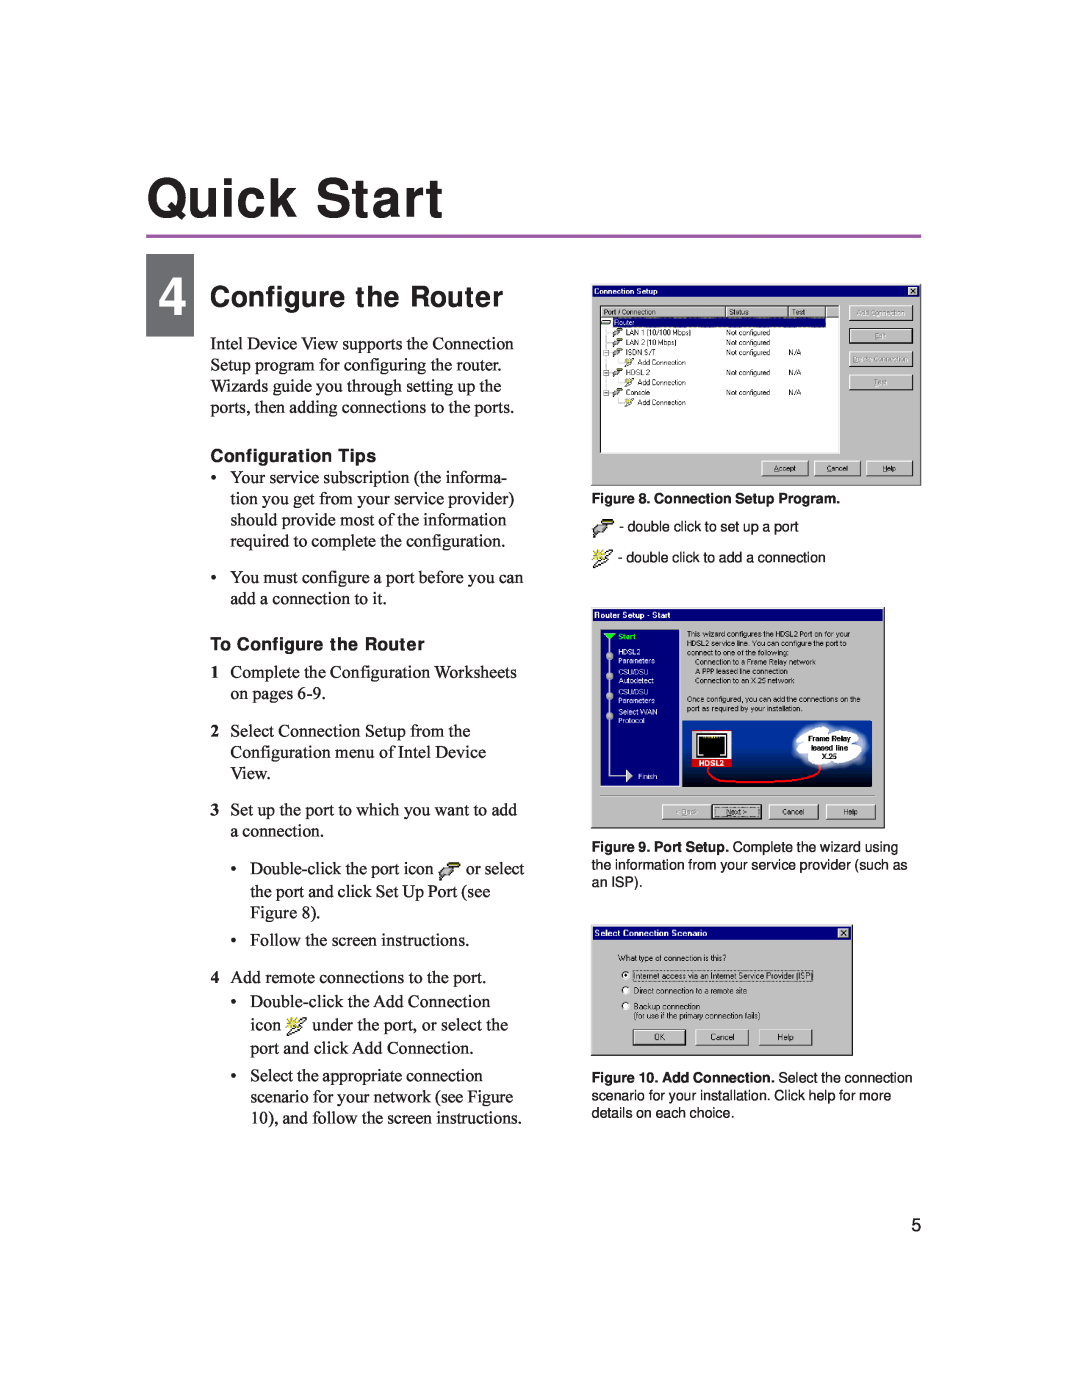 Intel 9545 quick start Quick Start, Configuration Tips, To Configure the Router 